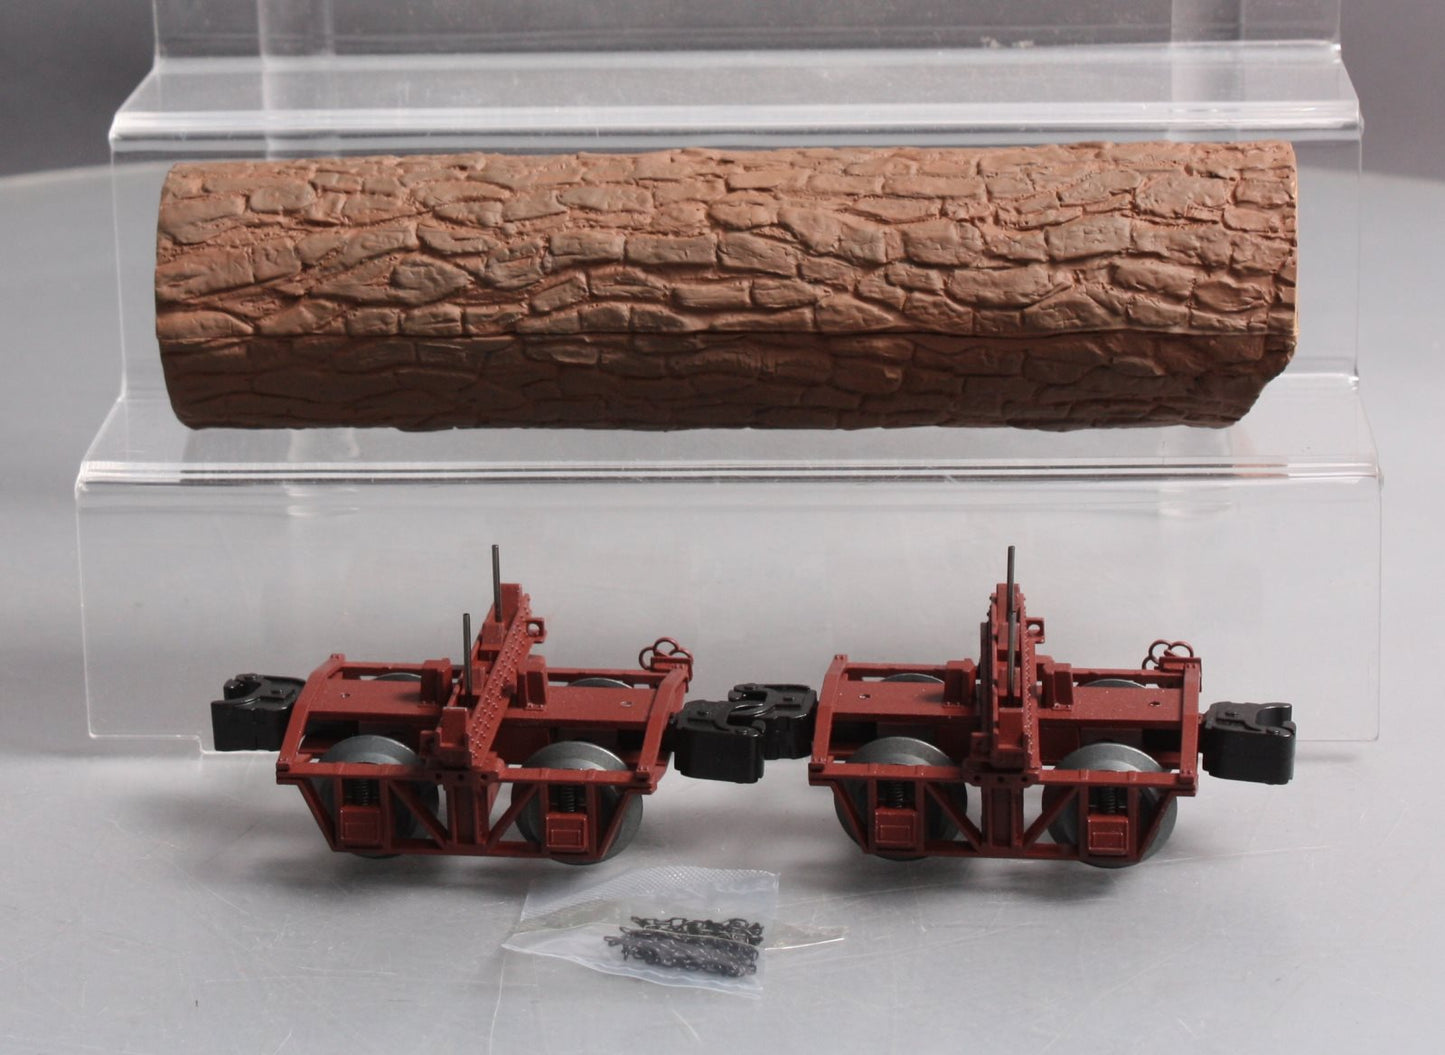 Lionel 6-84167 O Gauge Brown Logging Disconnects (Pack of 2)